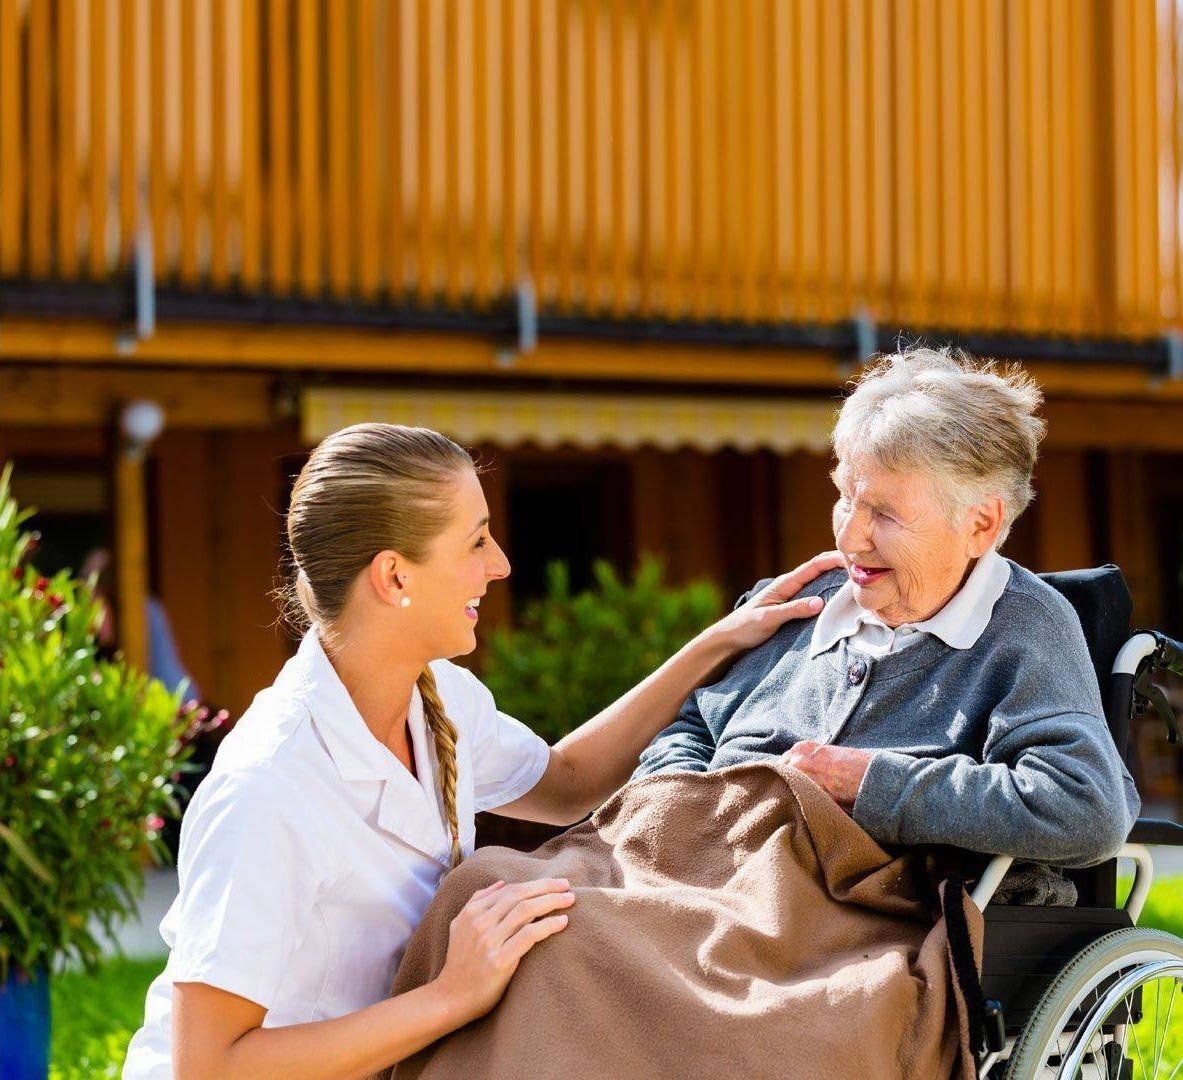 caregiver conversing with a smiling senior patient in a wheelchair.